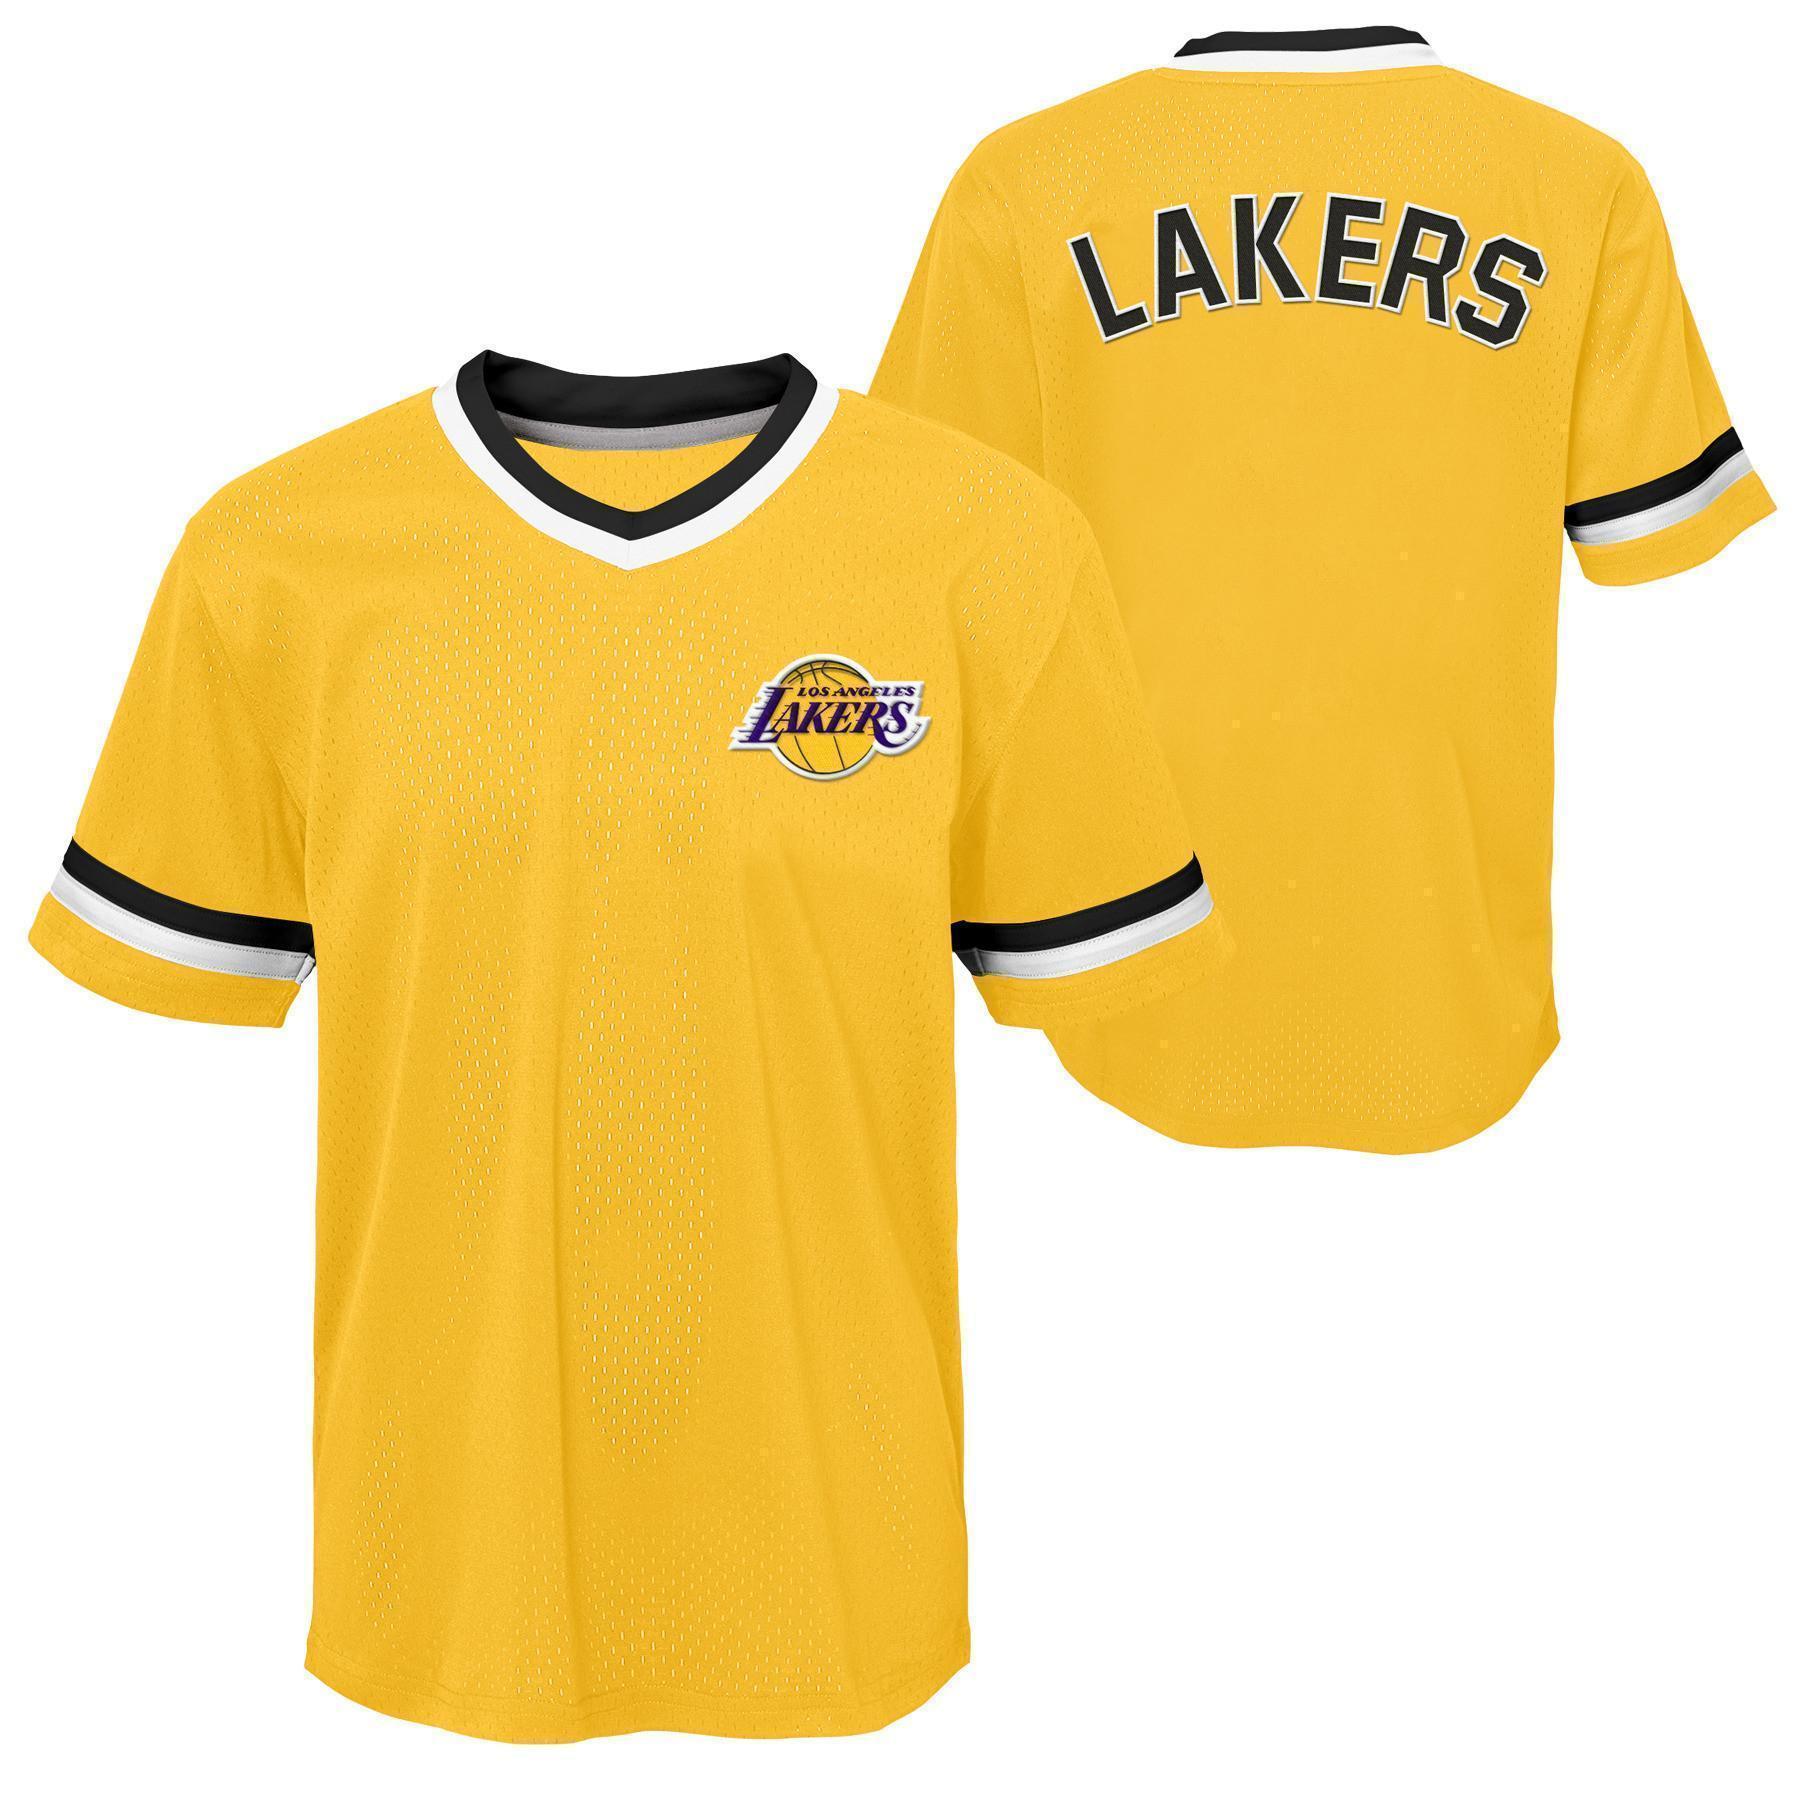 OuterstuffTM NBA Los Angeles Lakers jersey for kids